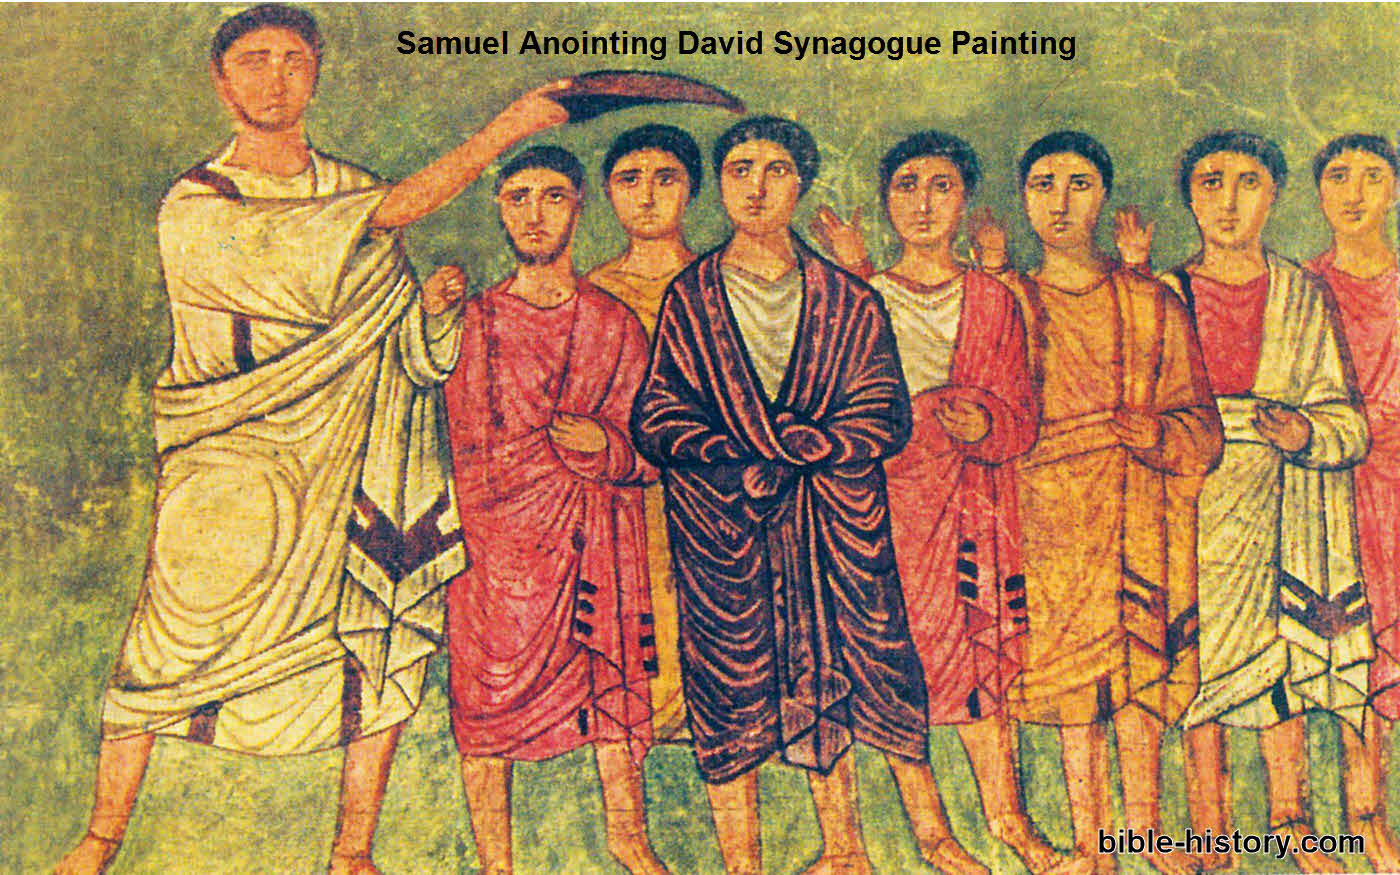 Samuel Anointing David, Also Jesse and sons in image. From Synagogue Painting